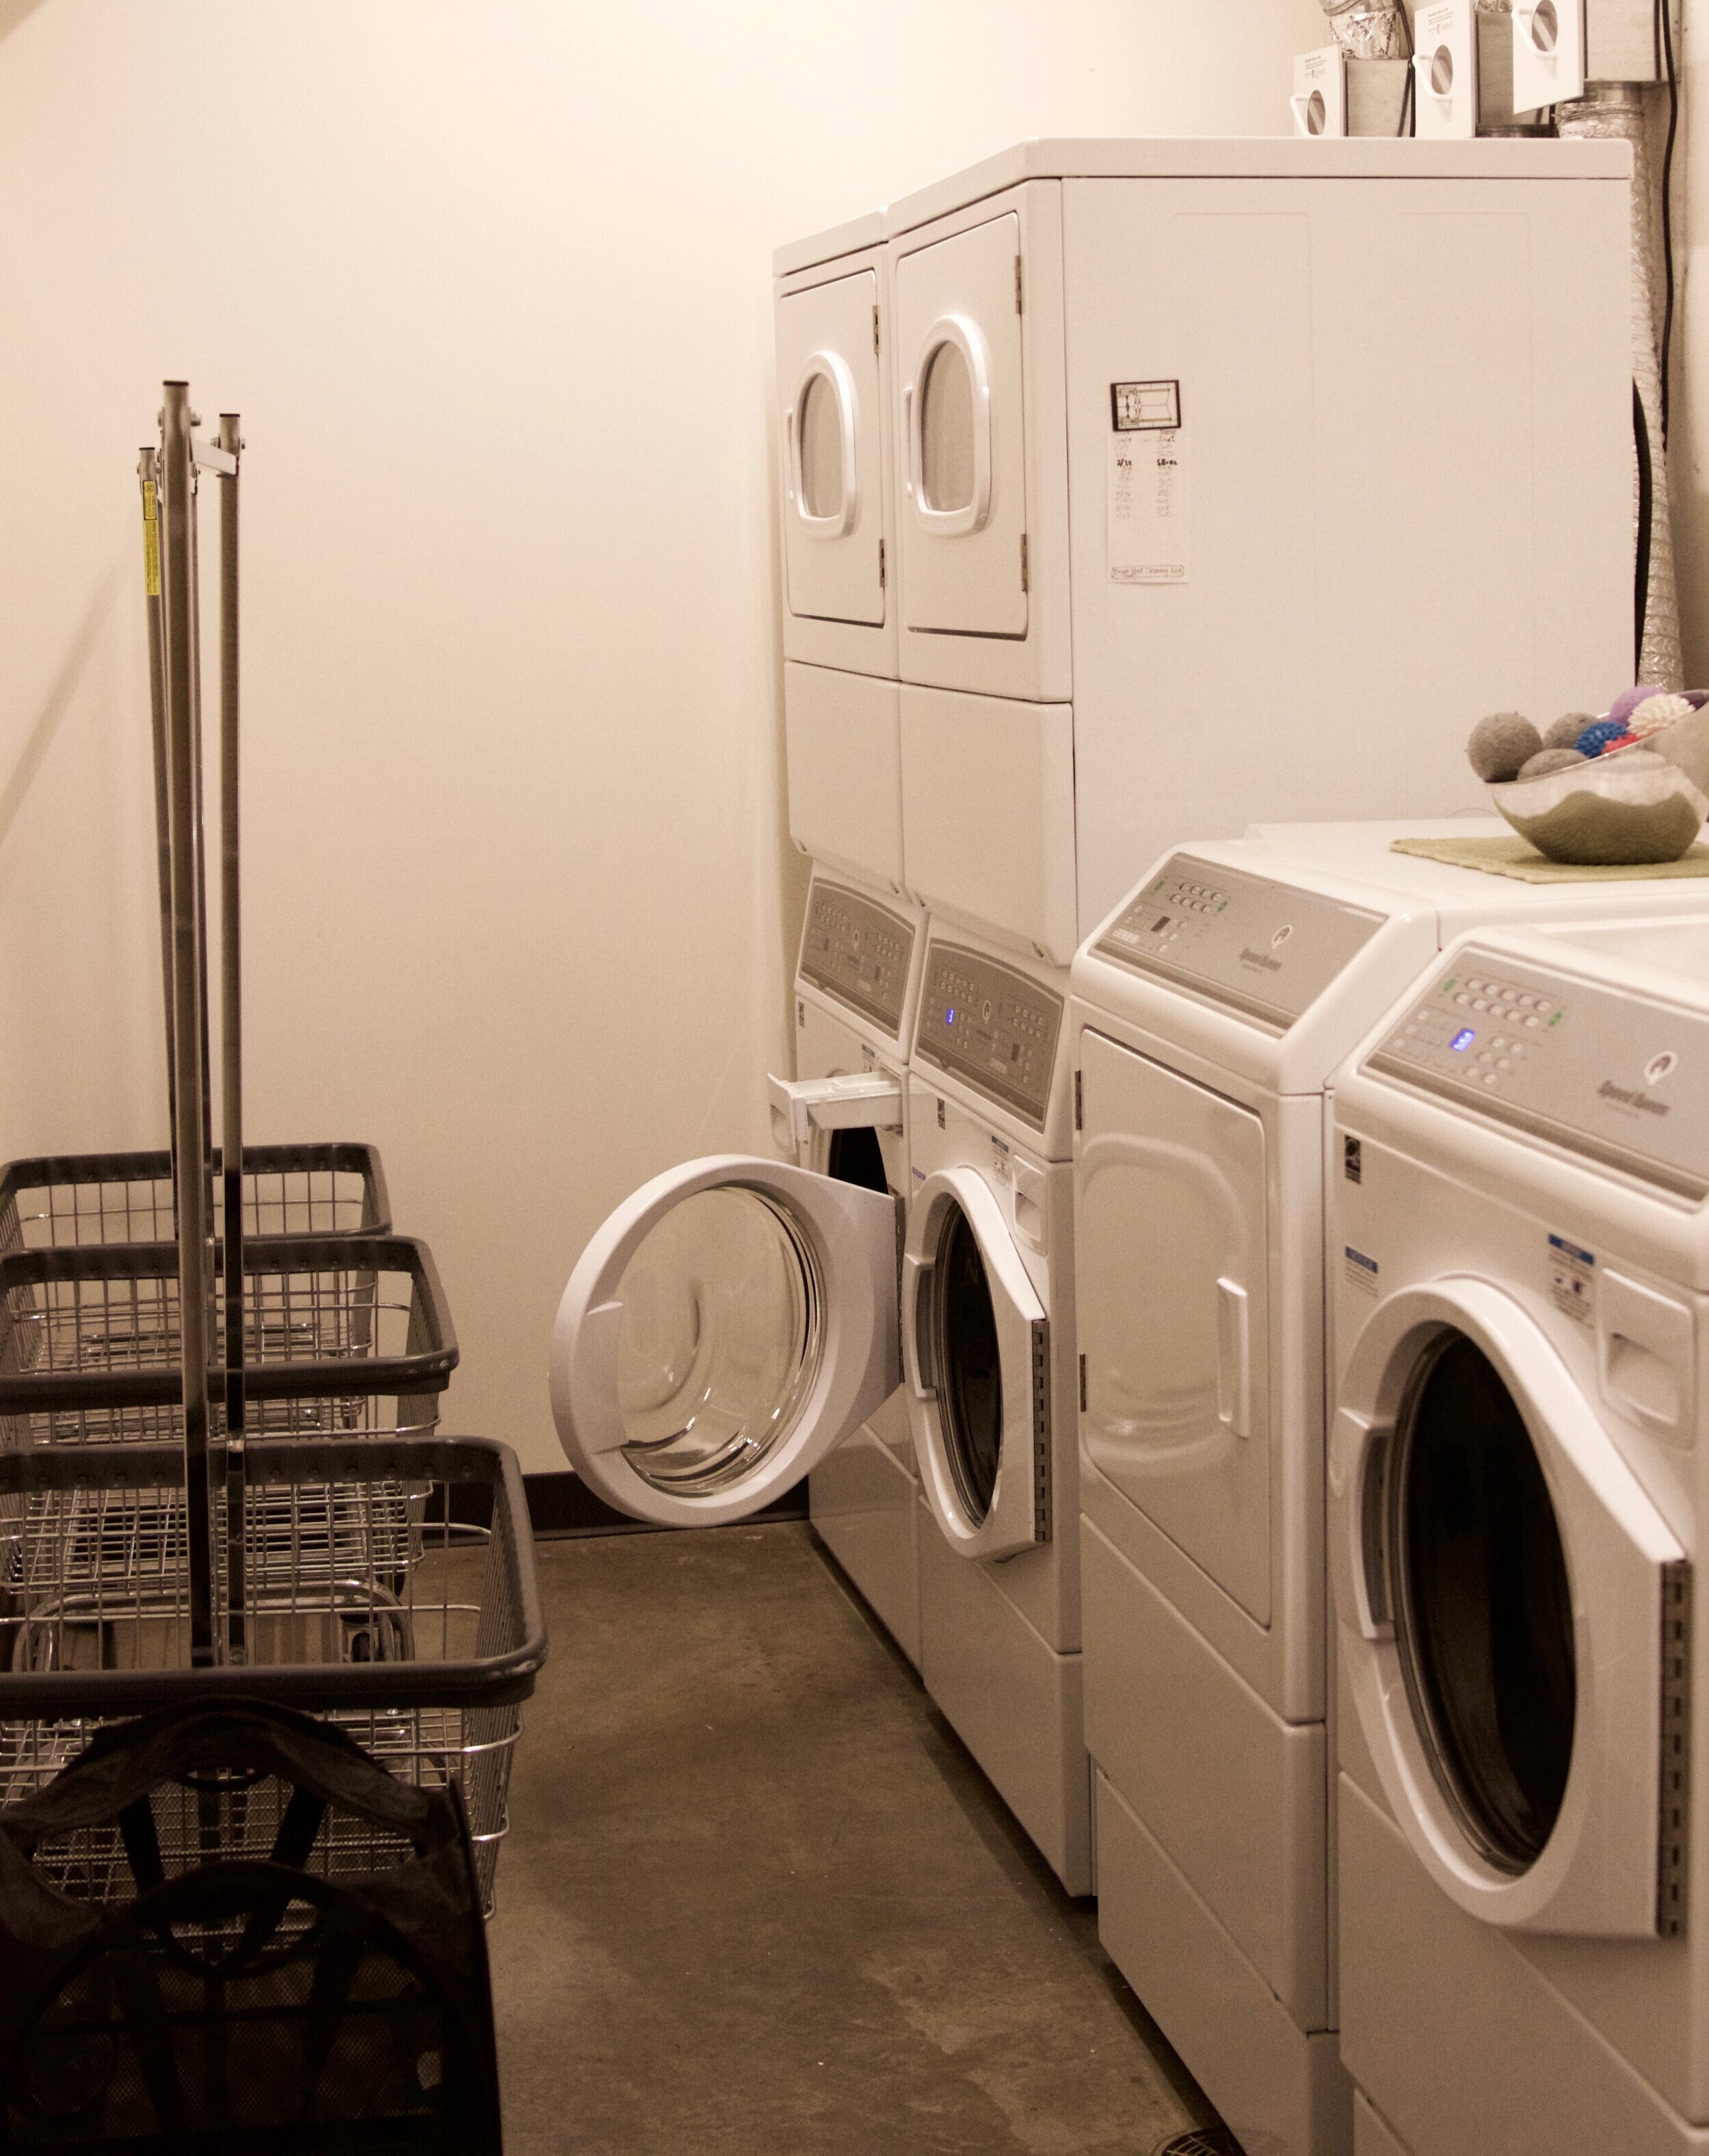 Example of shared laundry